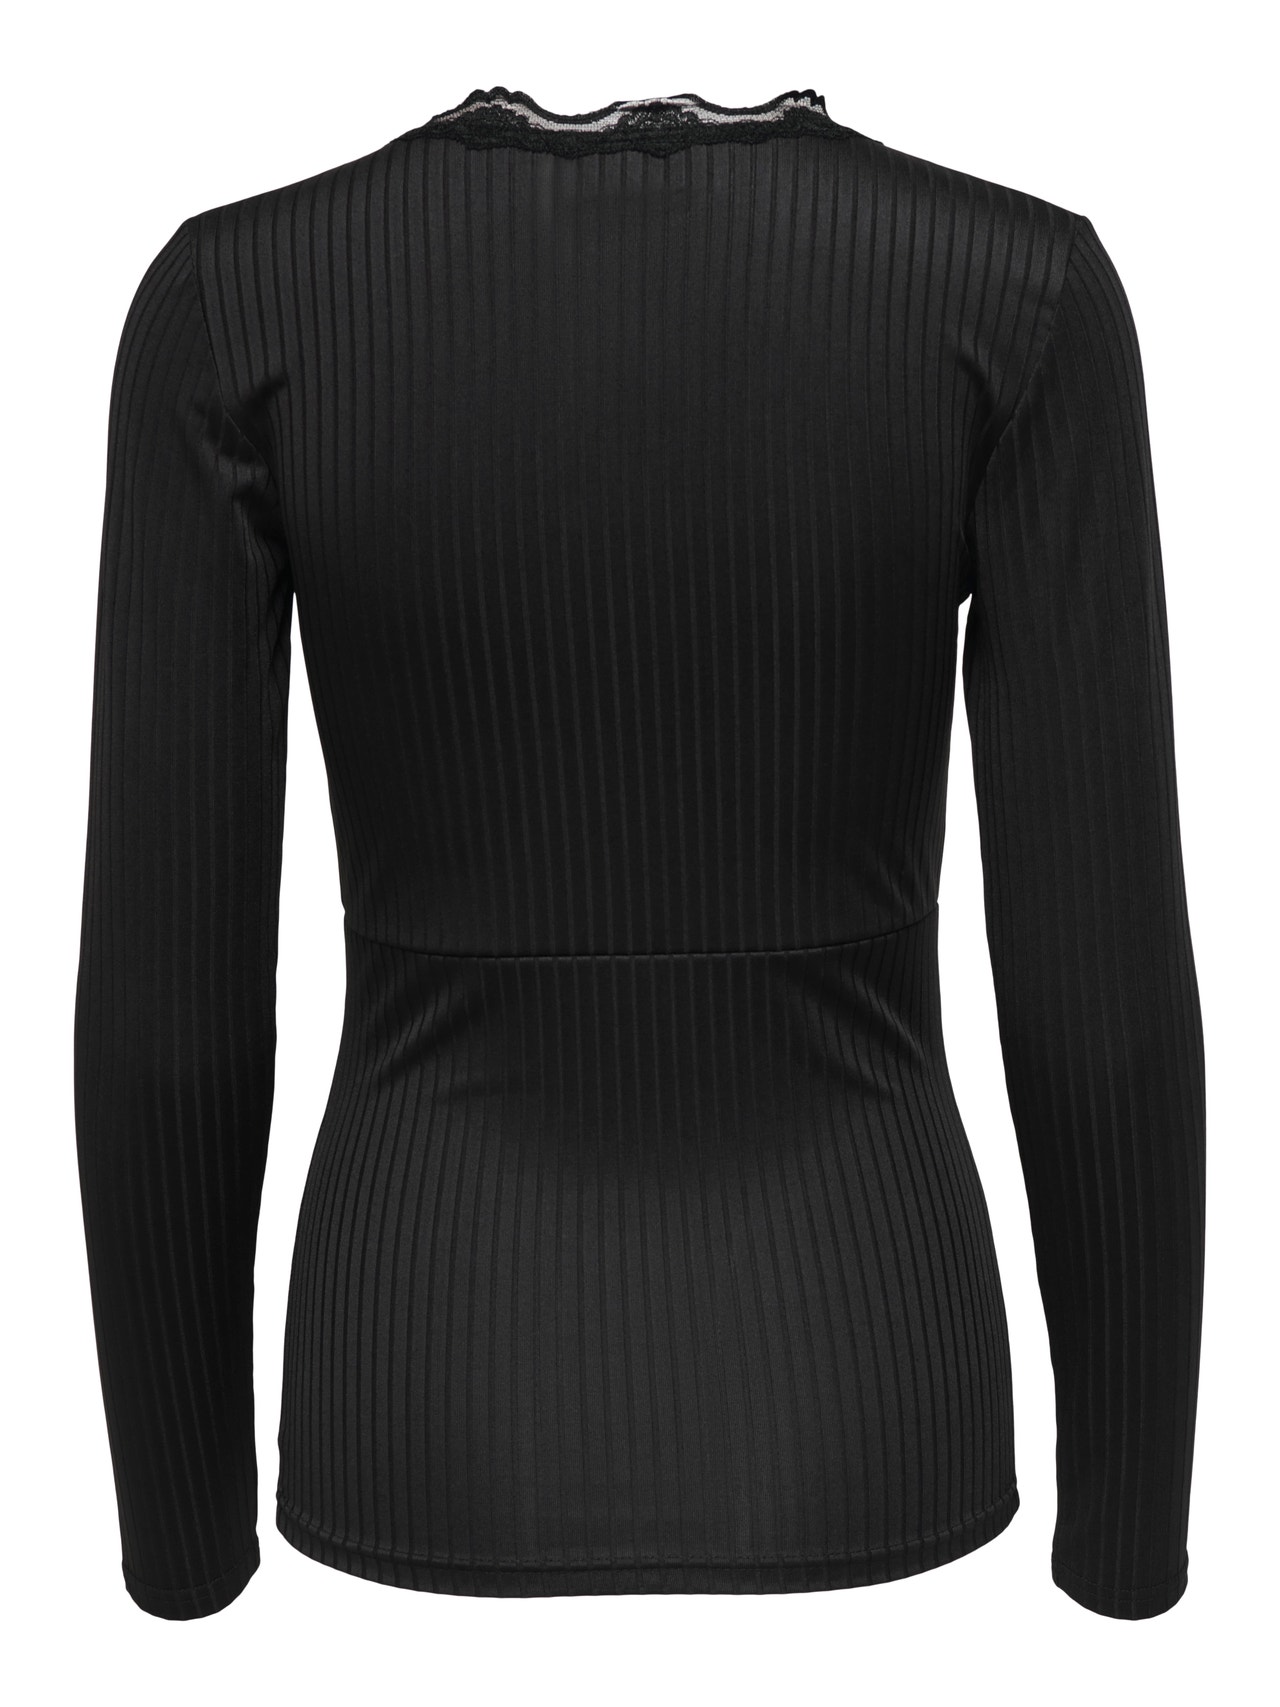 ONLY Wrap Long Sleeved Top -Black - 15276035